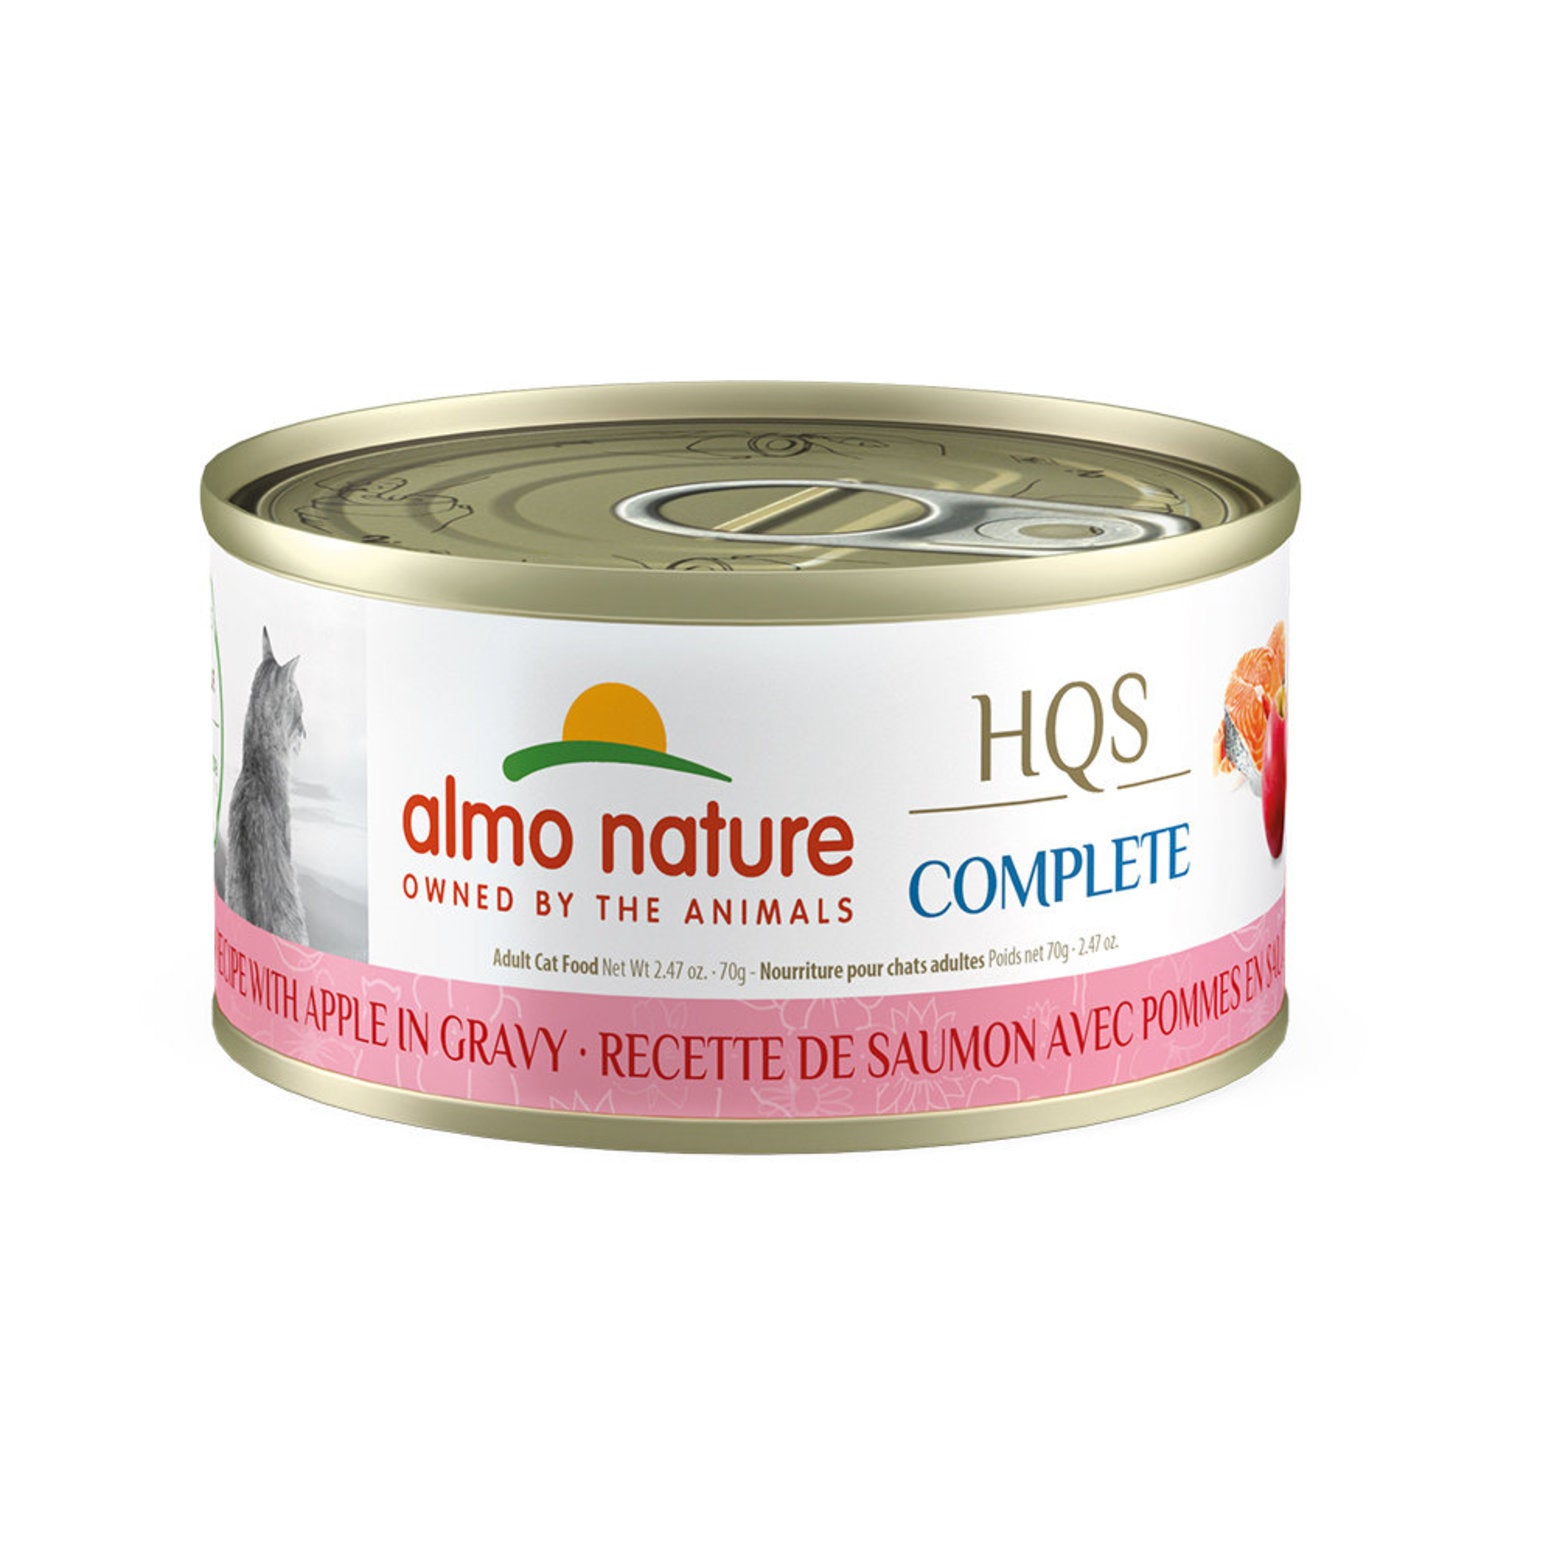 Almo Nature - HQS Complete Salmon Recipe with Apple in Gravy (Wet Cat Food) - 0